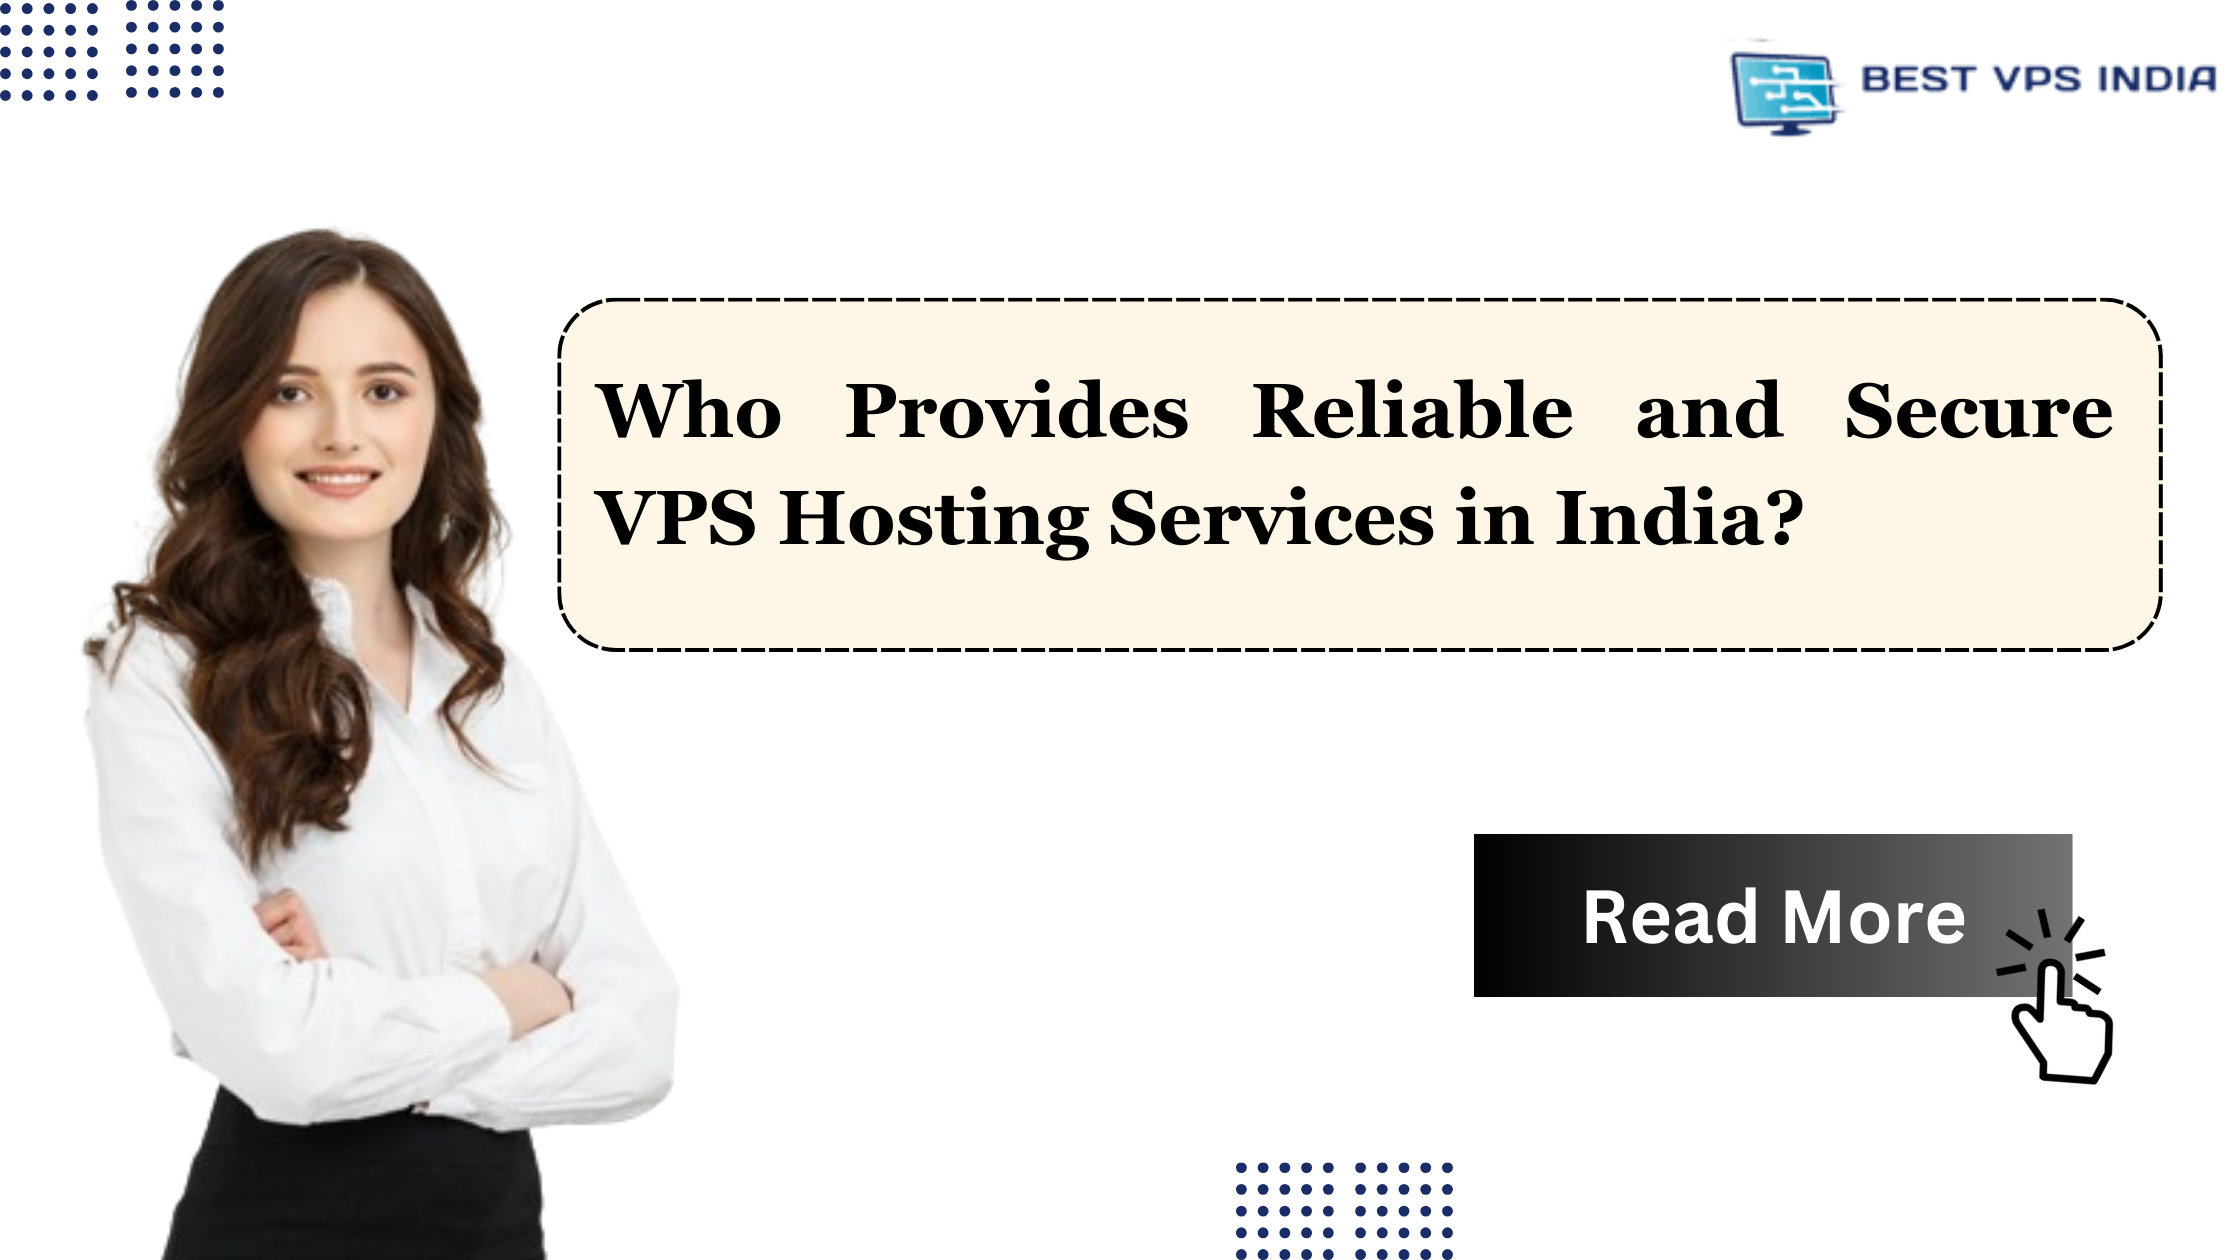 Who Provides Reliable and Secure VPS Hosting Services in India